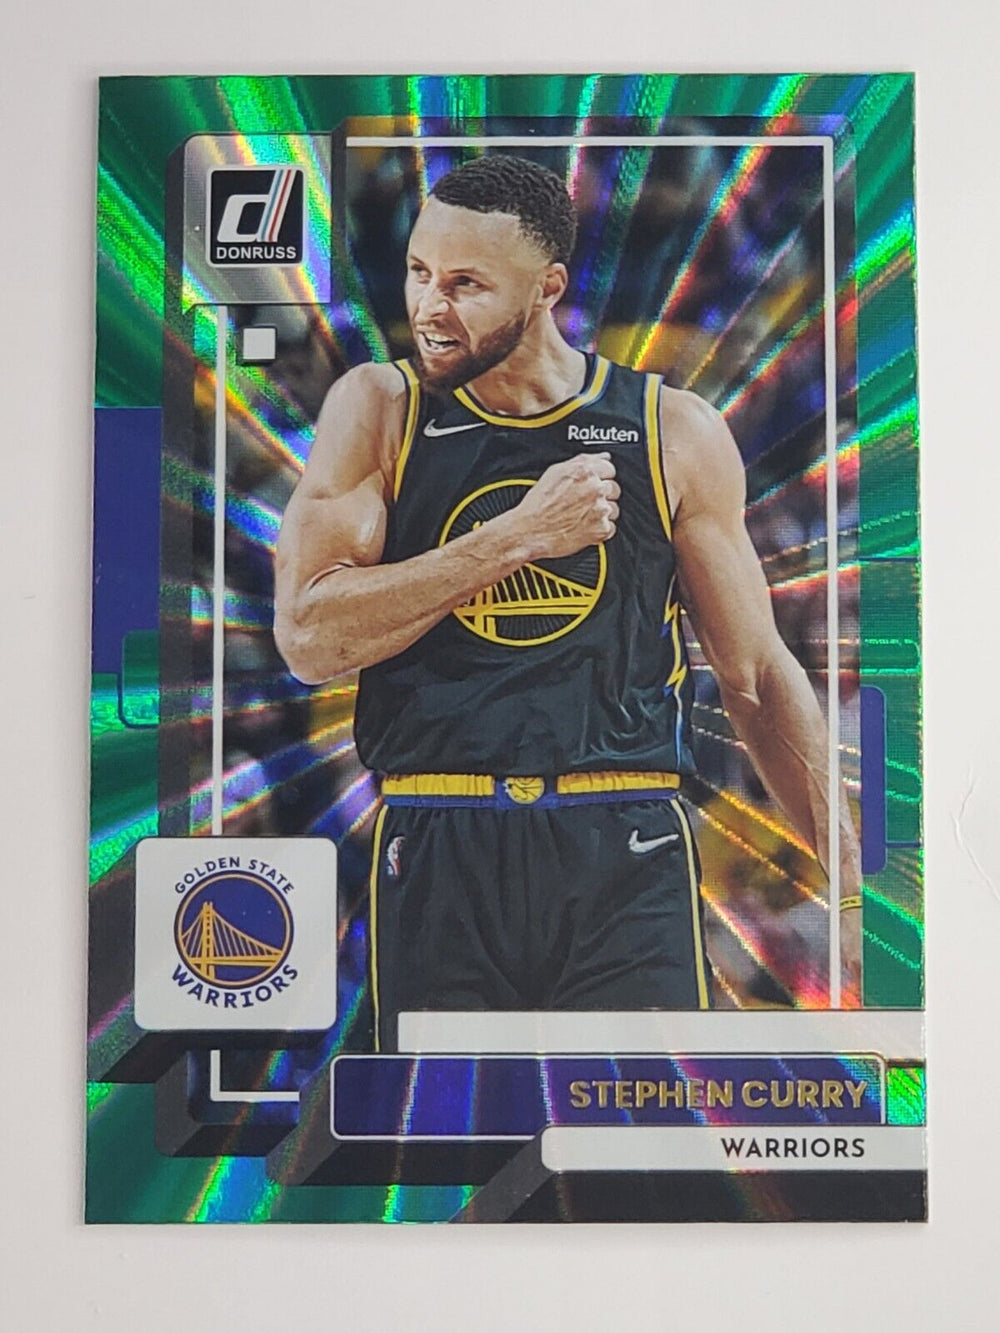  Stephen Curry 2021 2022 Donruss Complete Players